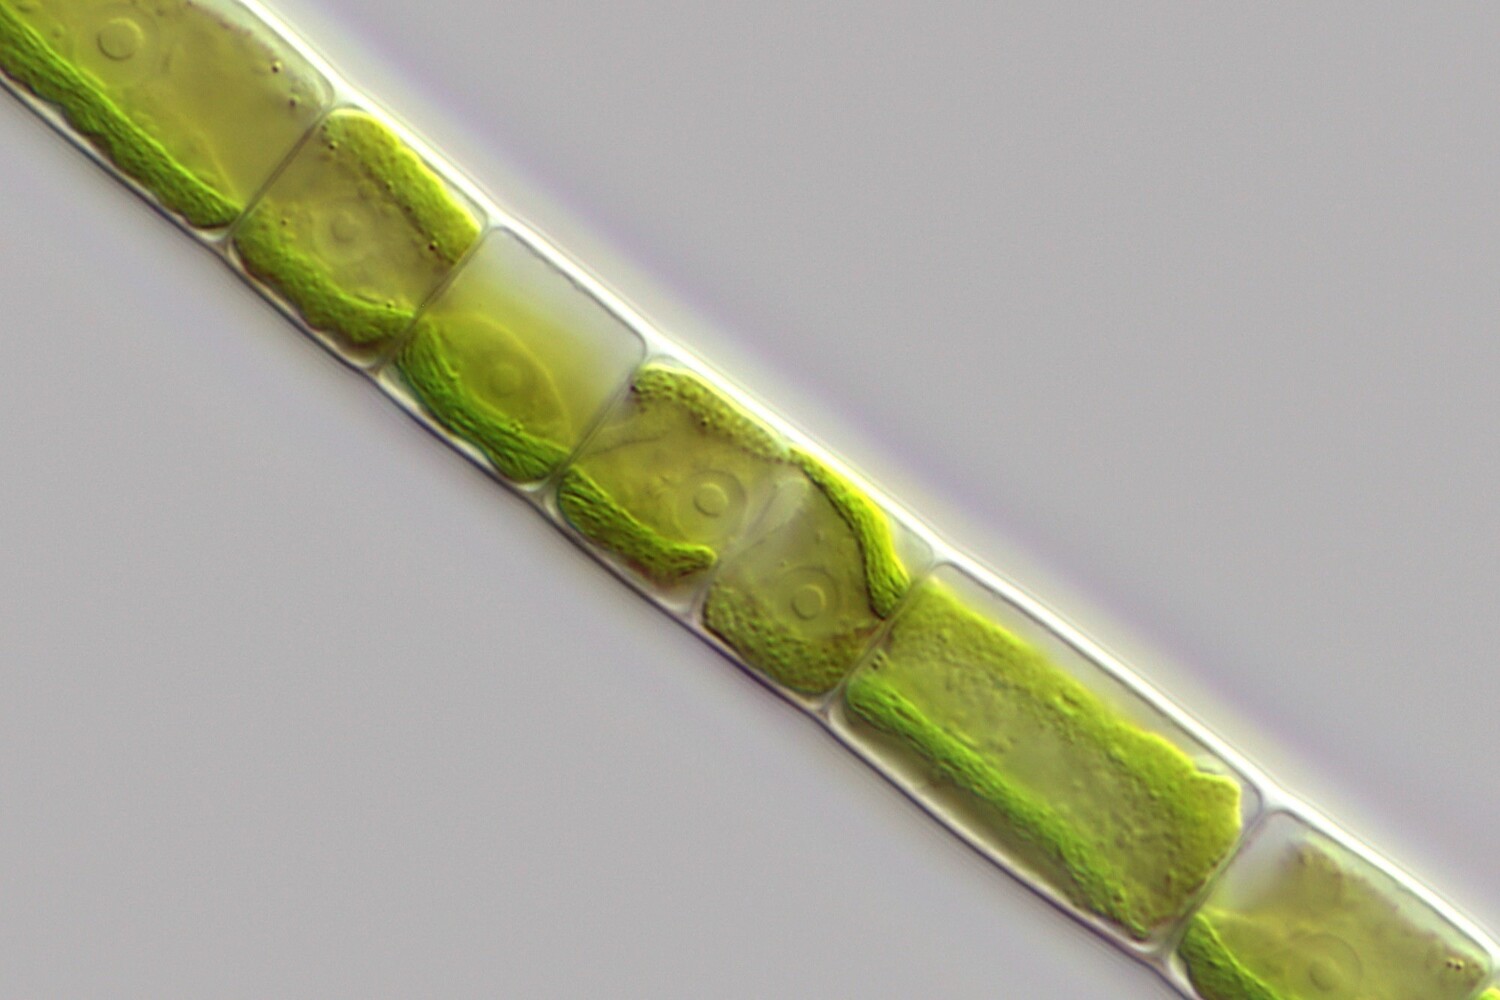 The team of researchers used hundreds of gene sequences to collect tens of thousands of the molecular characters that make up algal DNA. This enabled them to robustly reconstruct the relationship and evolutionary history of the Zygnematophyceae.